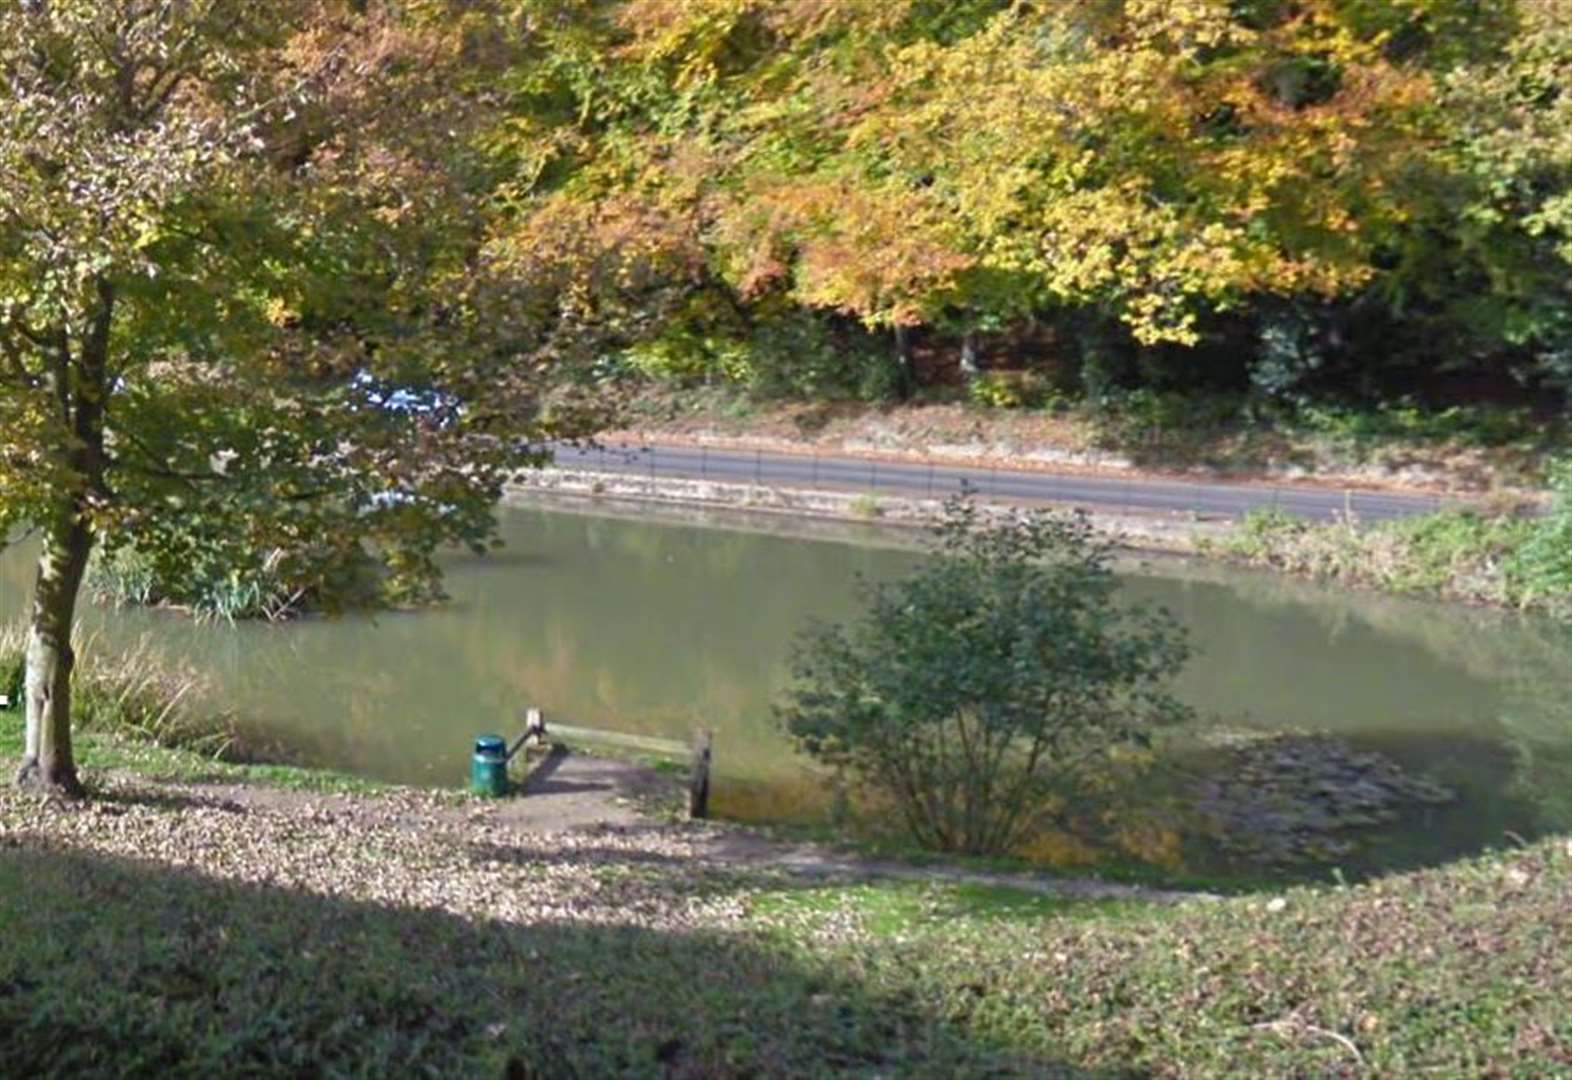 Council removes all fish from pond